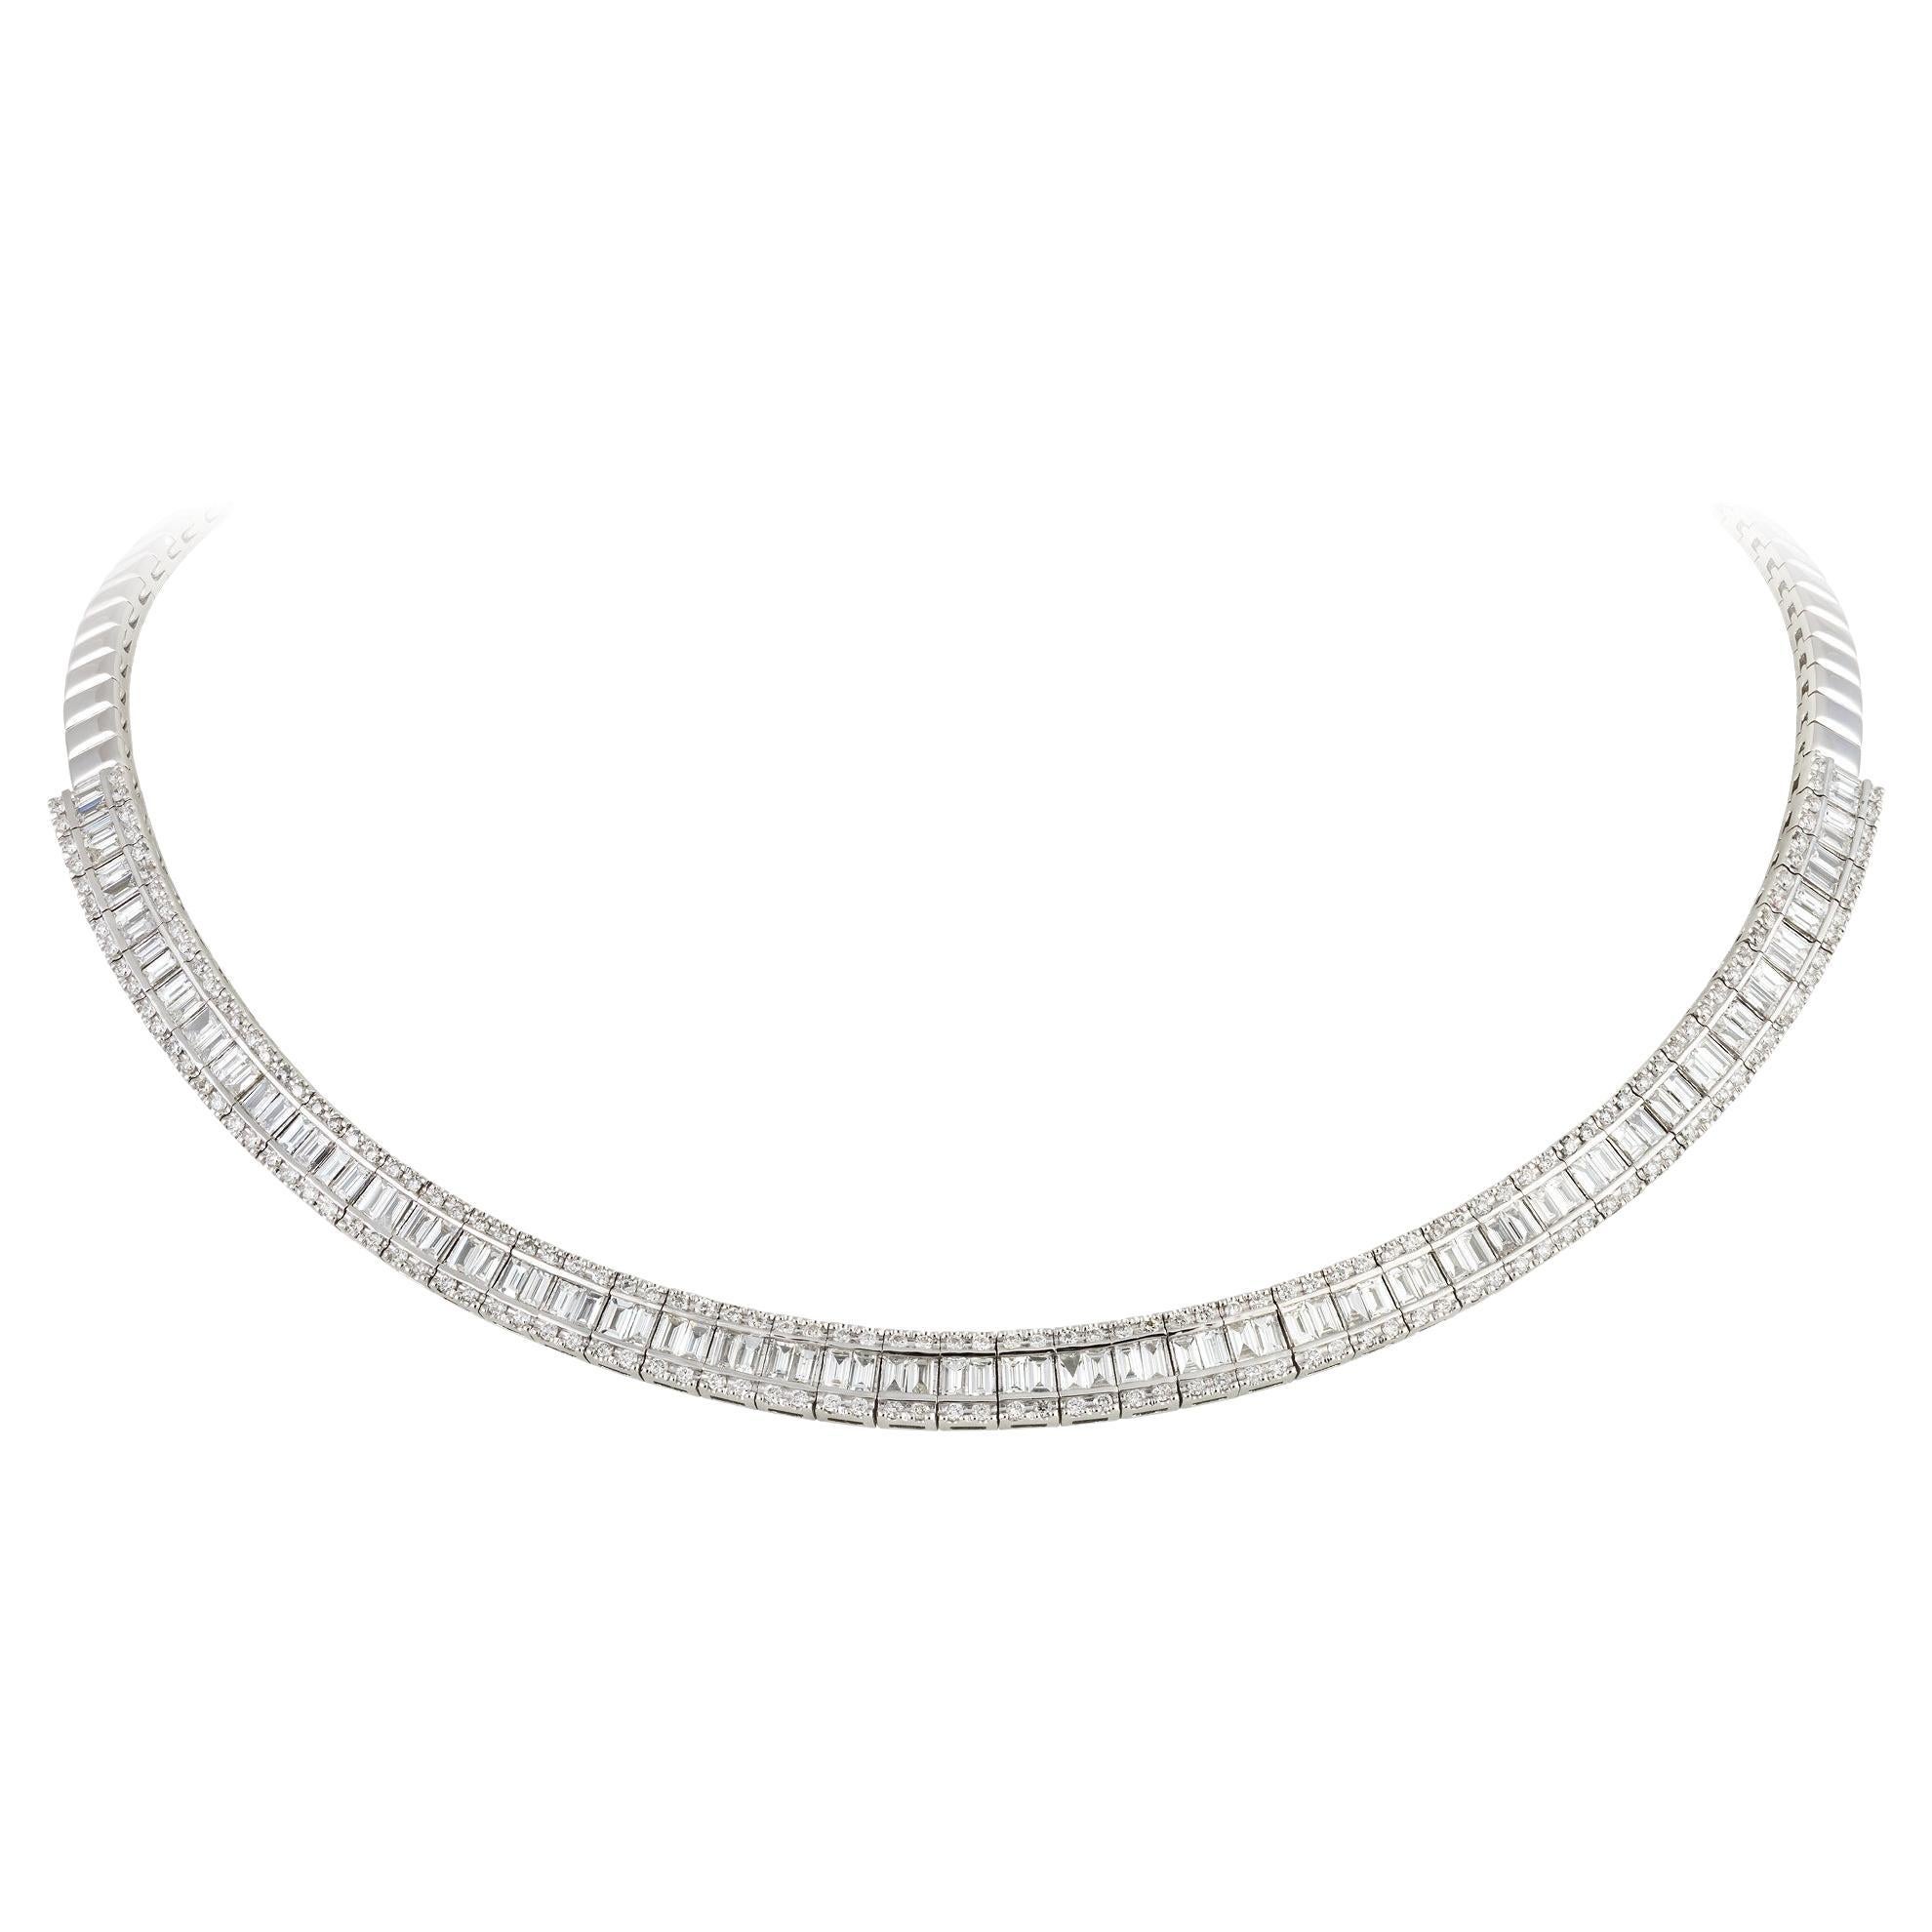 Unique Choker White Gold 18K Necklace Diamond for Her For Sale